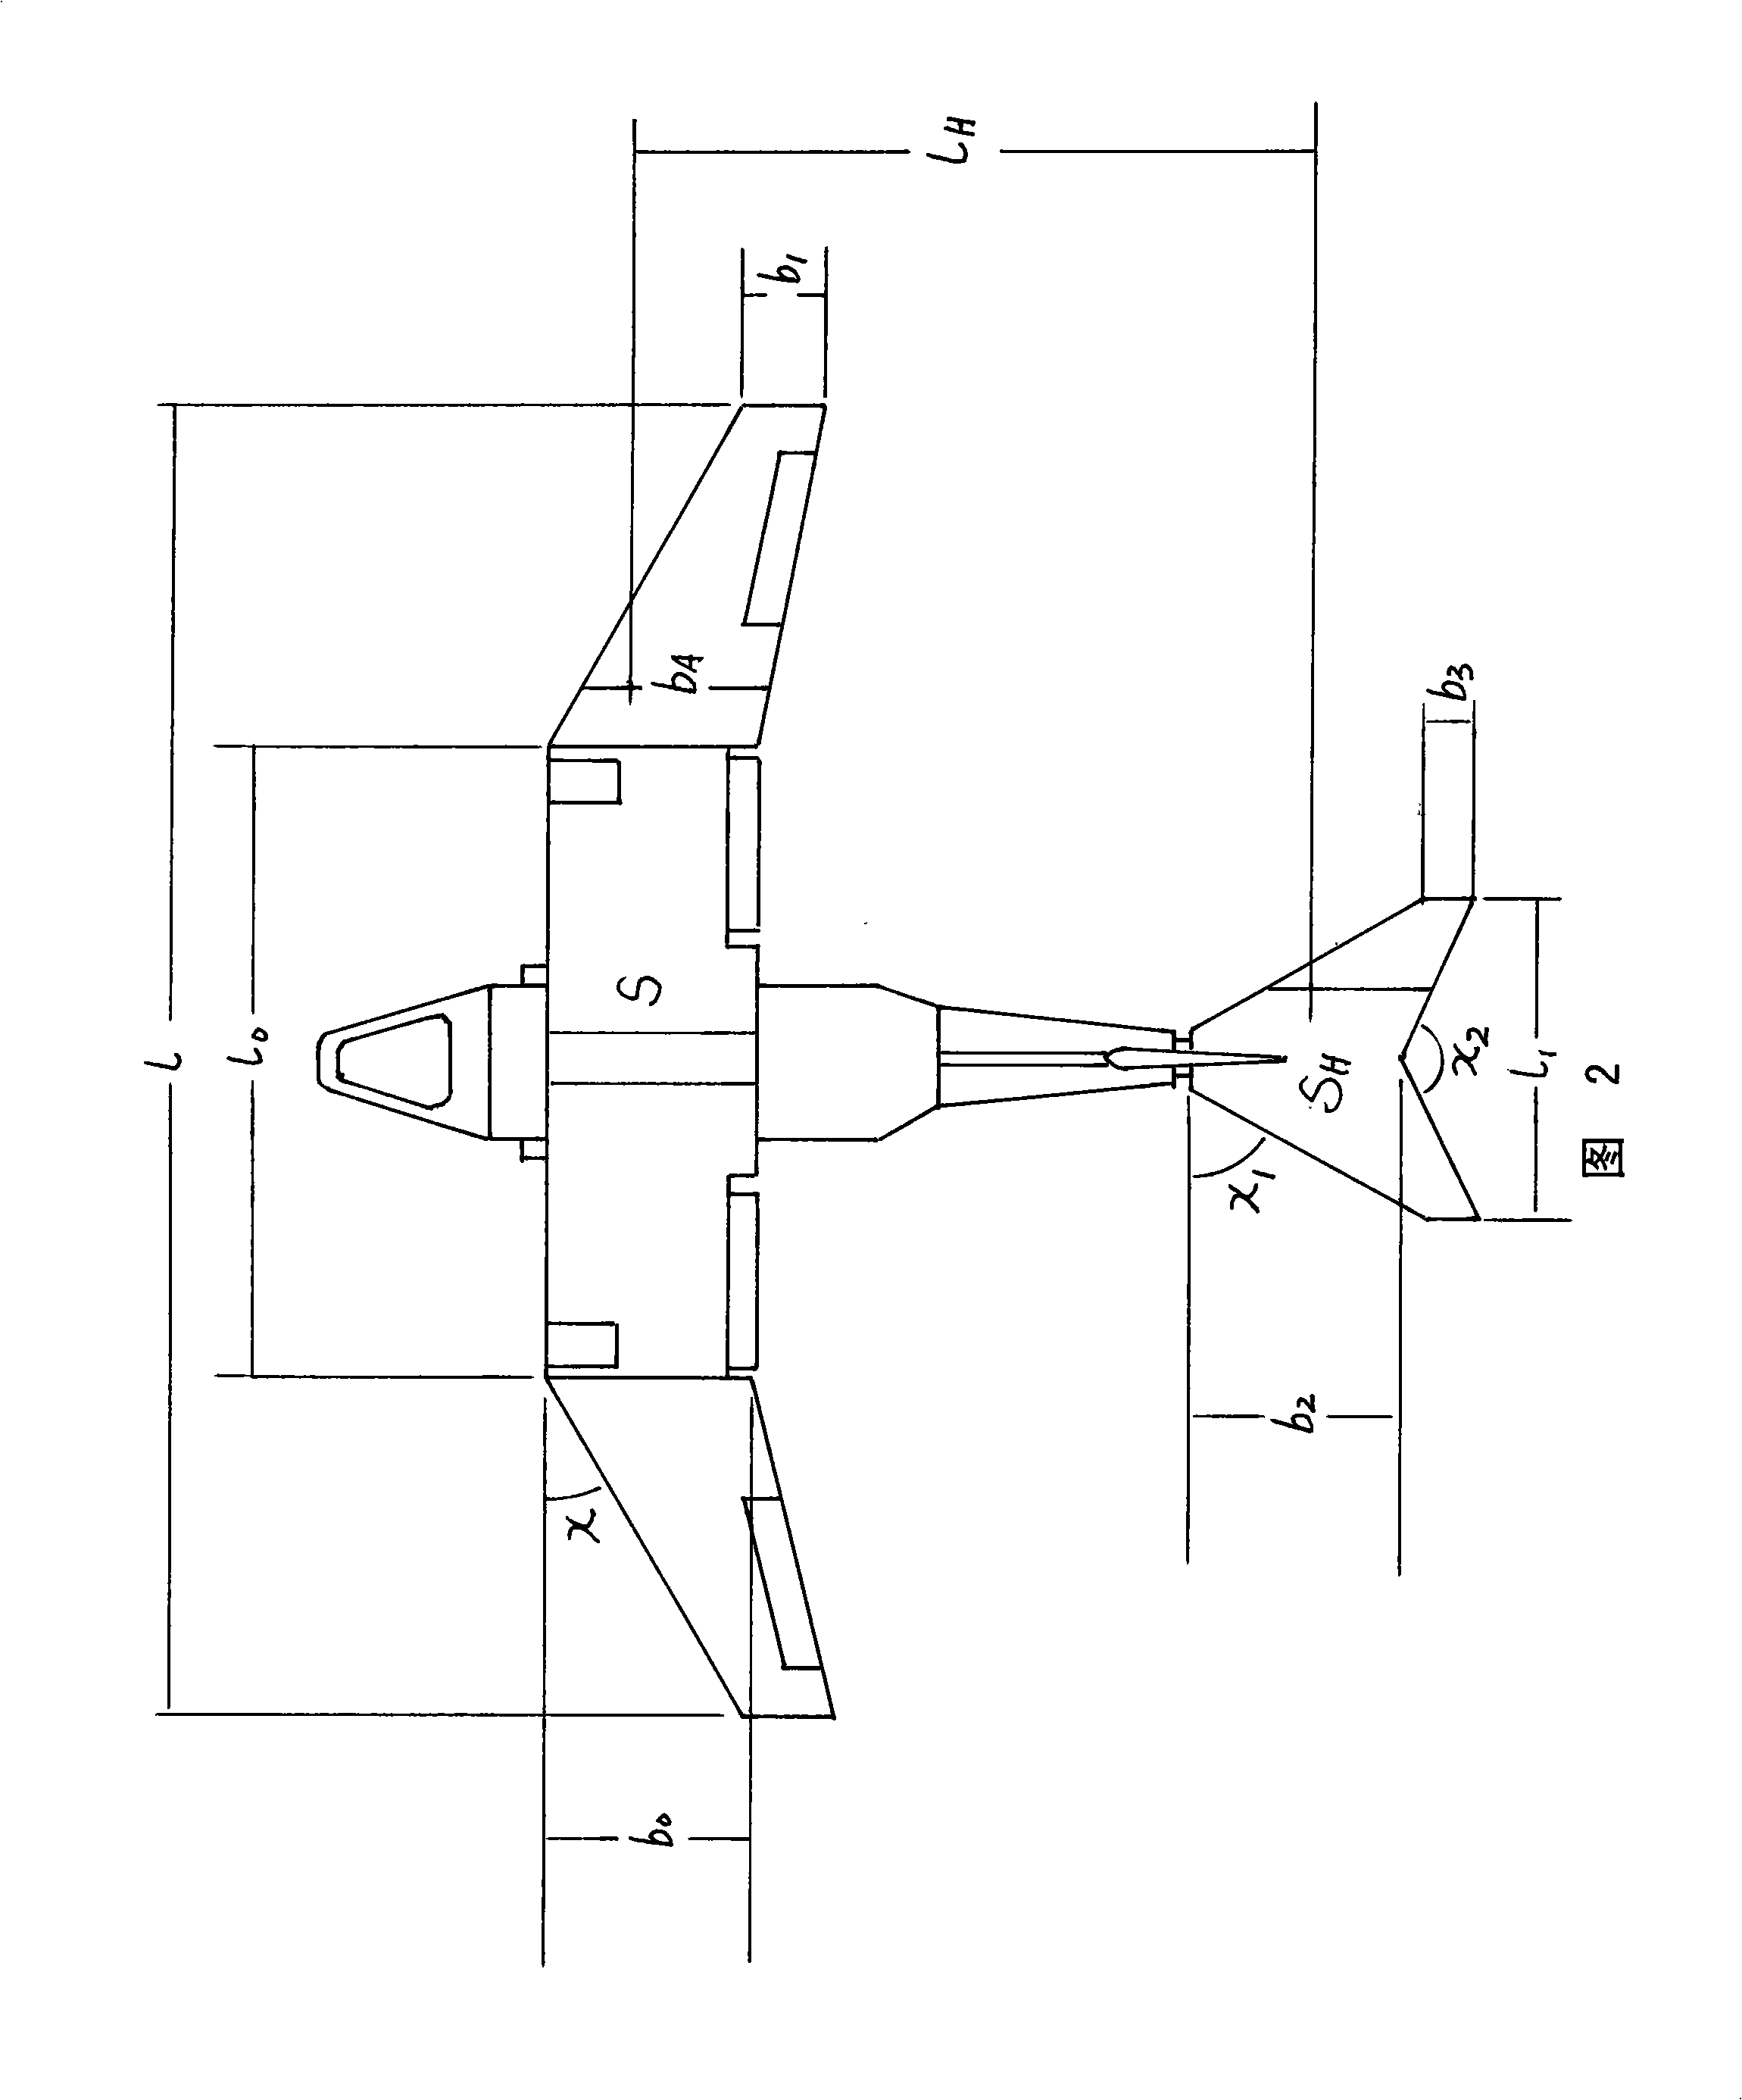 Swallow type inclined rotation rotorcraft